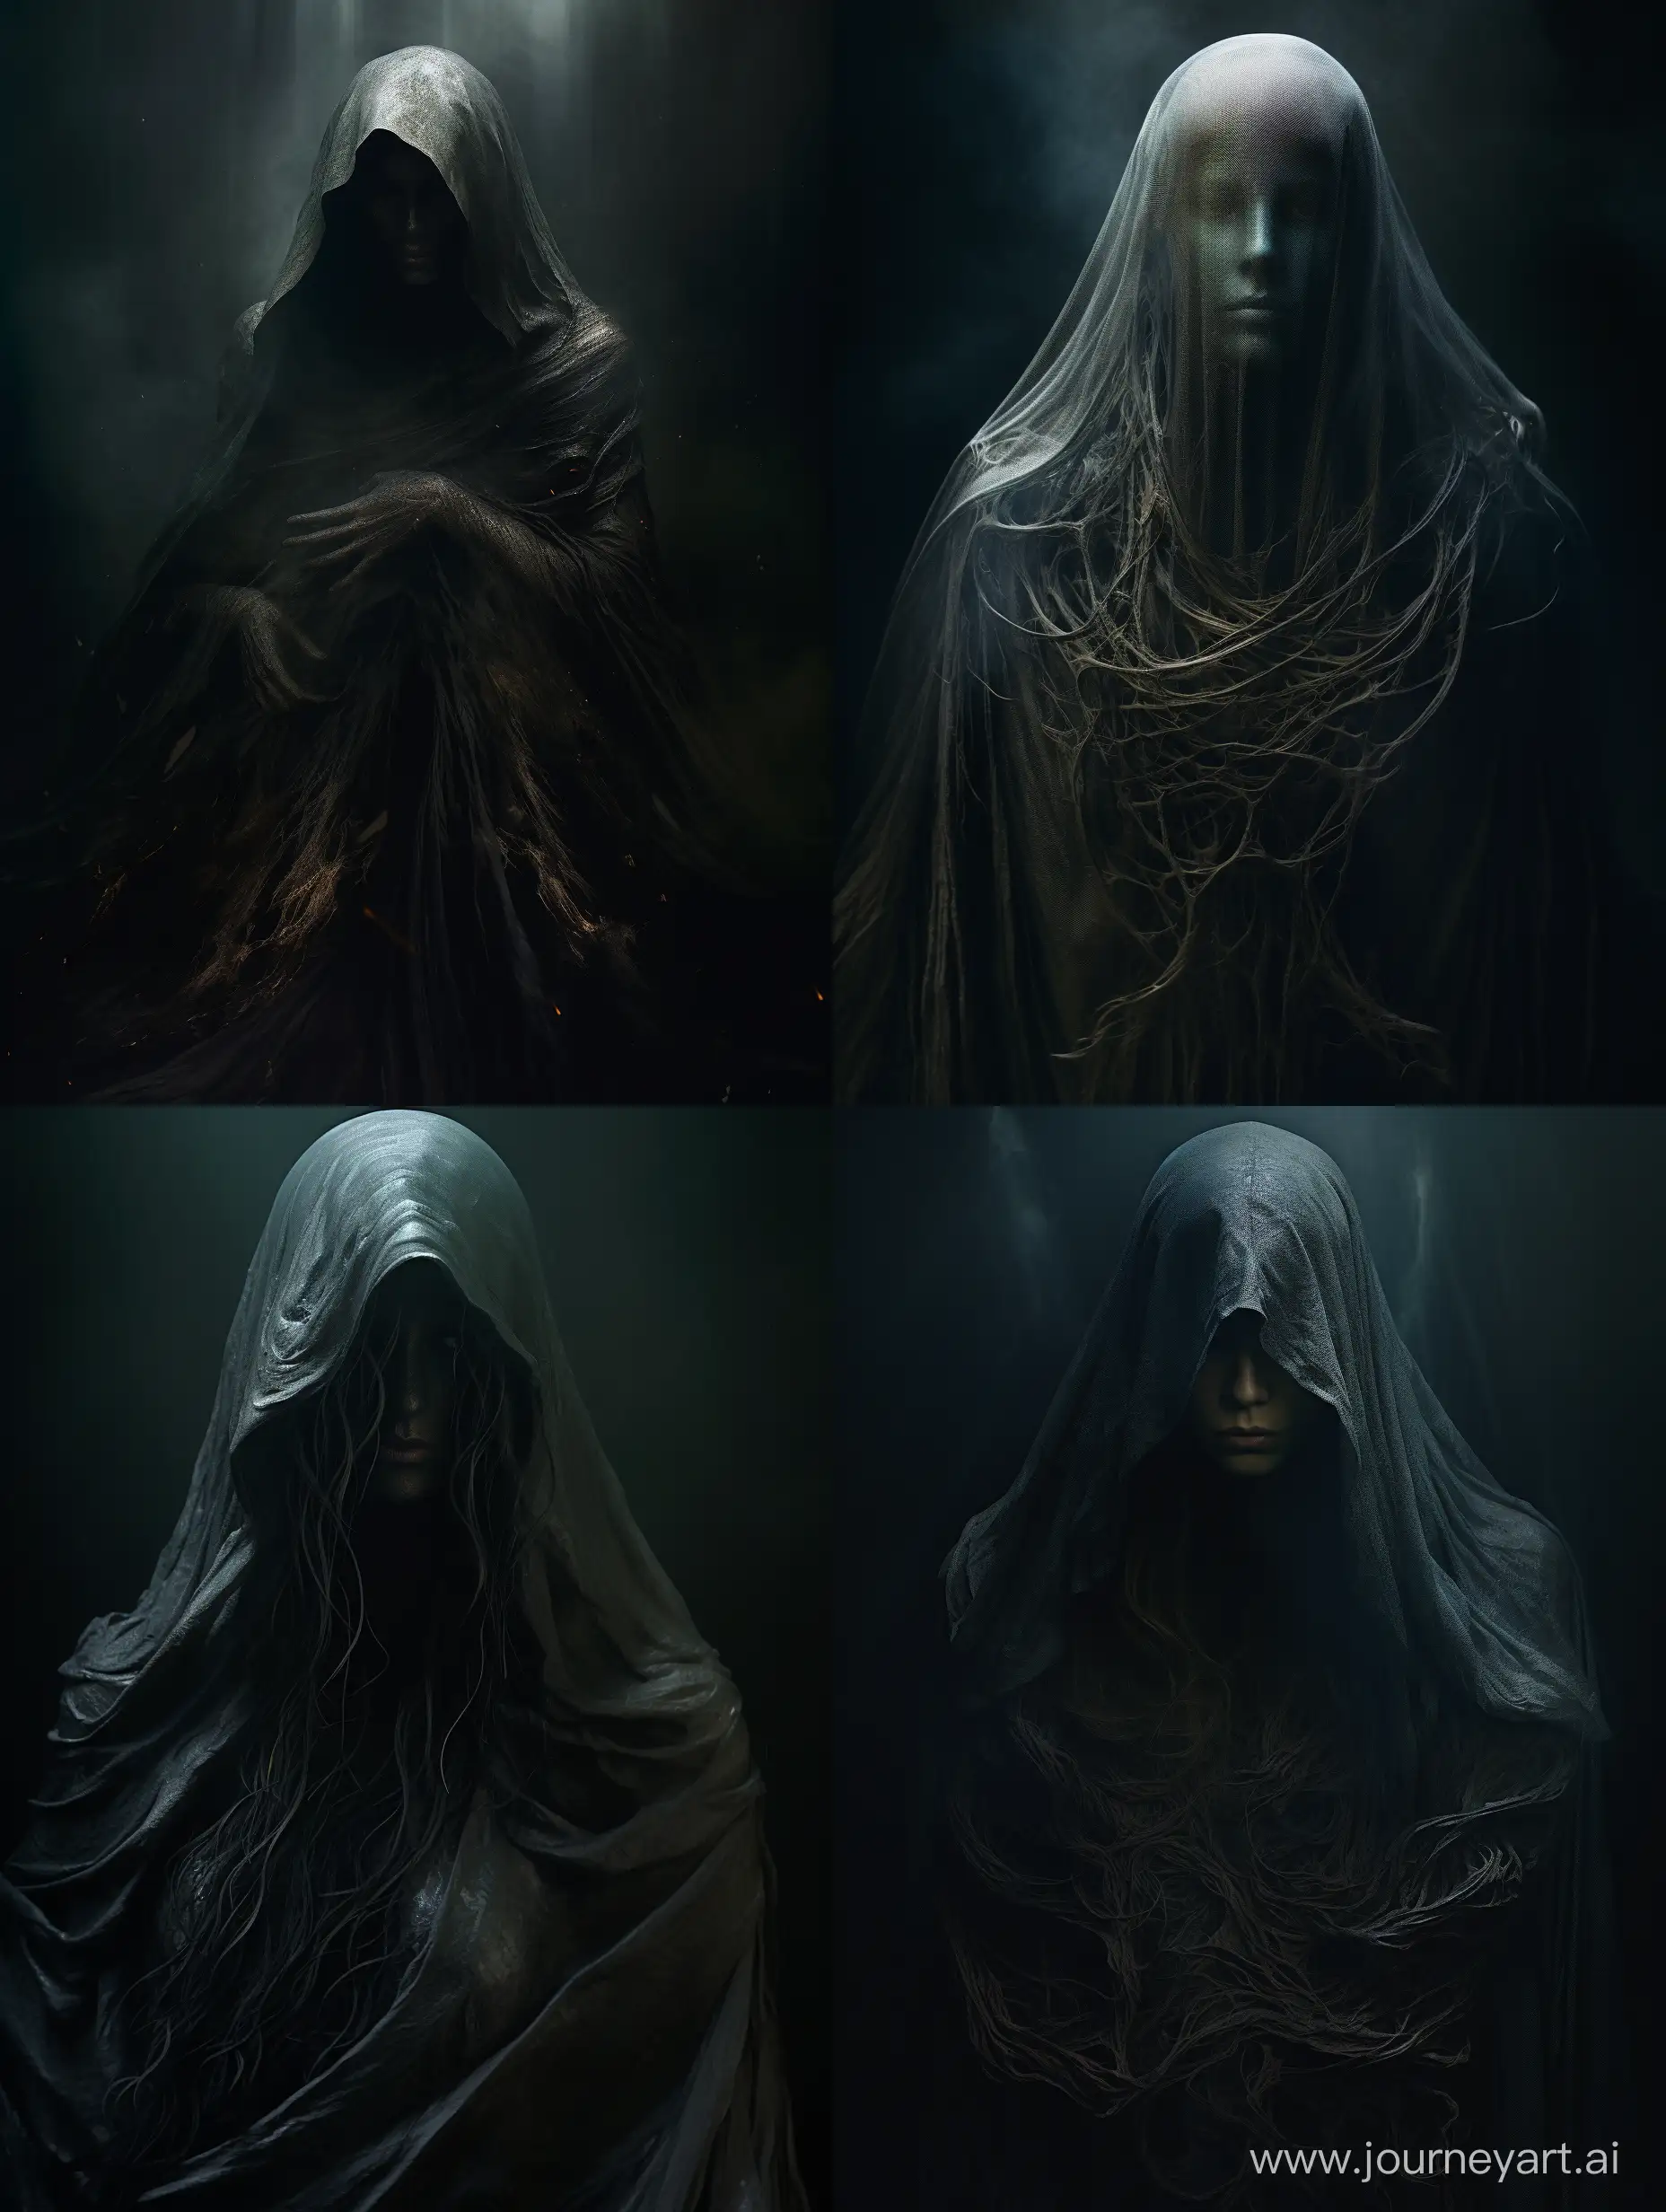 /imagine prompt: A haunting portrait of a spirit with a dark cloak covering its entire body and face. The atmosphere is eerie and ominous, with the lighting emphasizing the details of the cloak and the spirit's features. The image has a high quality, with intricate details in the folds of the cloak and the spirit's facial features. The spirit is shown in a close-up, with the cloak covering its entire body and face, leaving only its eyes visible. The cloak is dark and textured, with intricate patterns that add to the ominous atmosphere of the image. The background is simple, with a neutral color that emphasizes the focus on the spirit and its features. The composition is elegant, with the focus on the spirit's haunting presence. The image has a photorealistic quality that allows for every detail to be seen clearly, making it feel like a real portrait of a dark spirit. It's a perfect fit for those who appreciate the eerie and ominous quality of supernatural beings. --ar 3:4 
